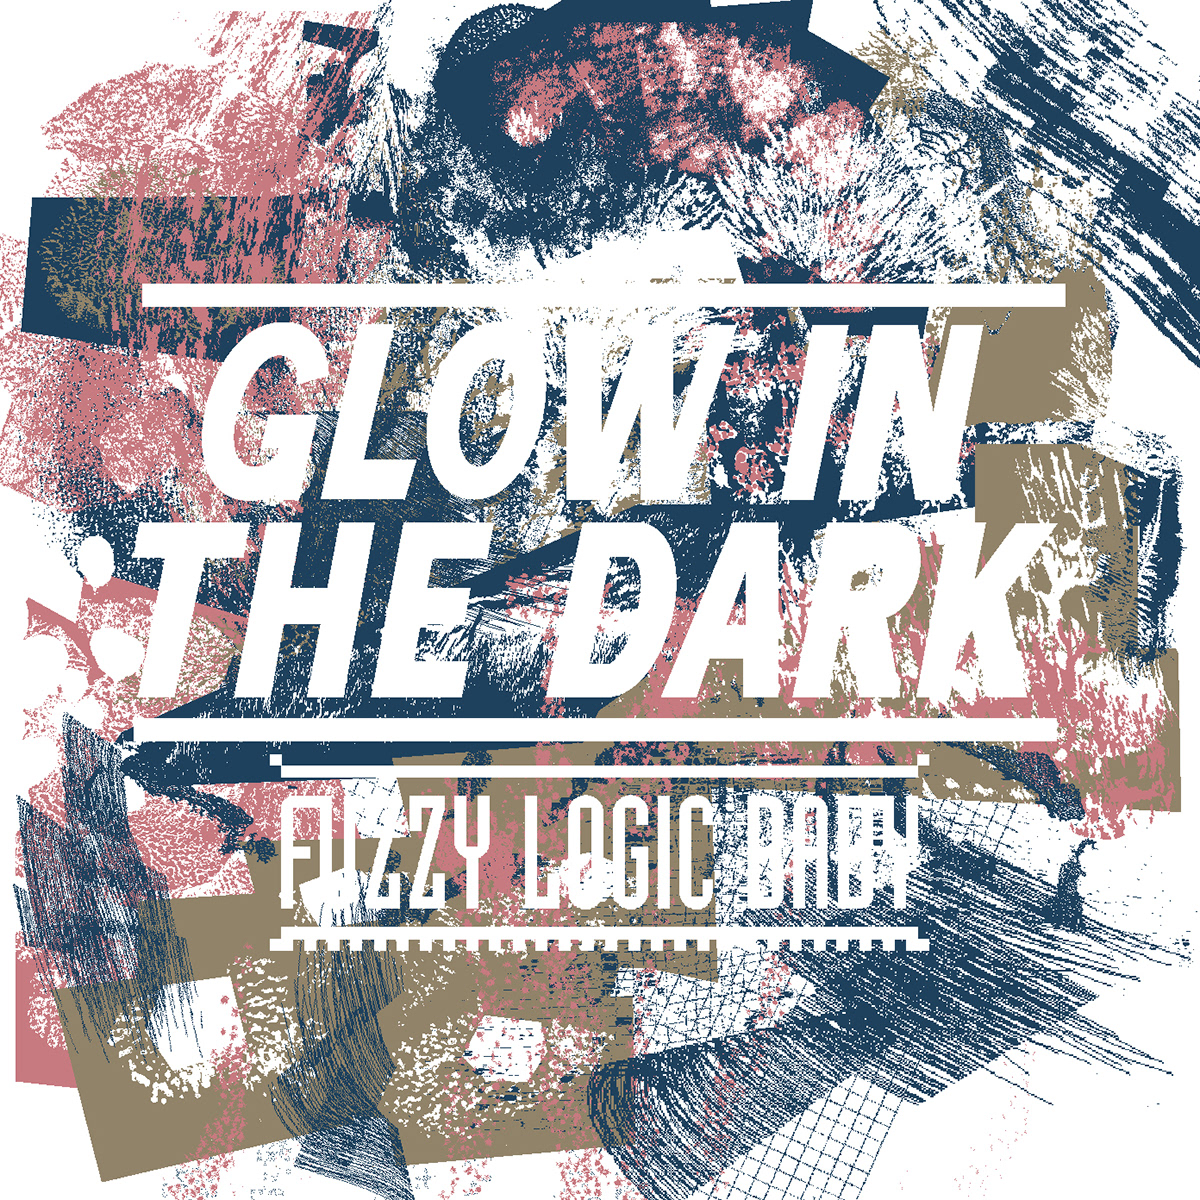 Fuzzy Logic Baby glow dark Will Long ep Sea bed Planet surface reeds weeds crater screen printing cd